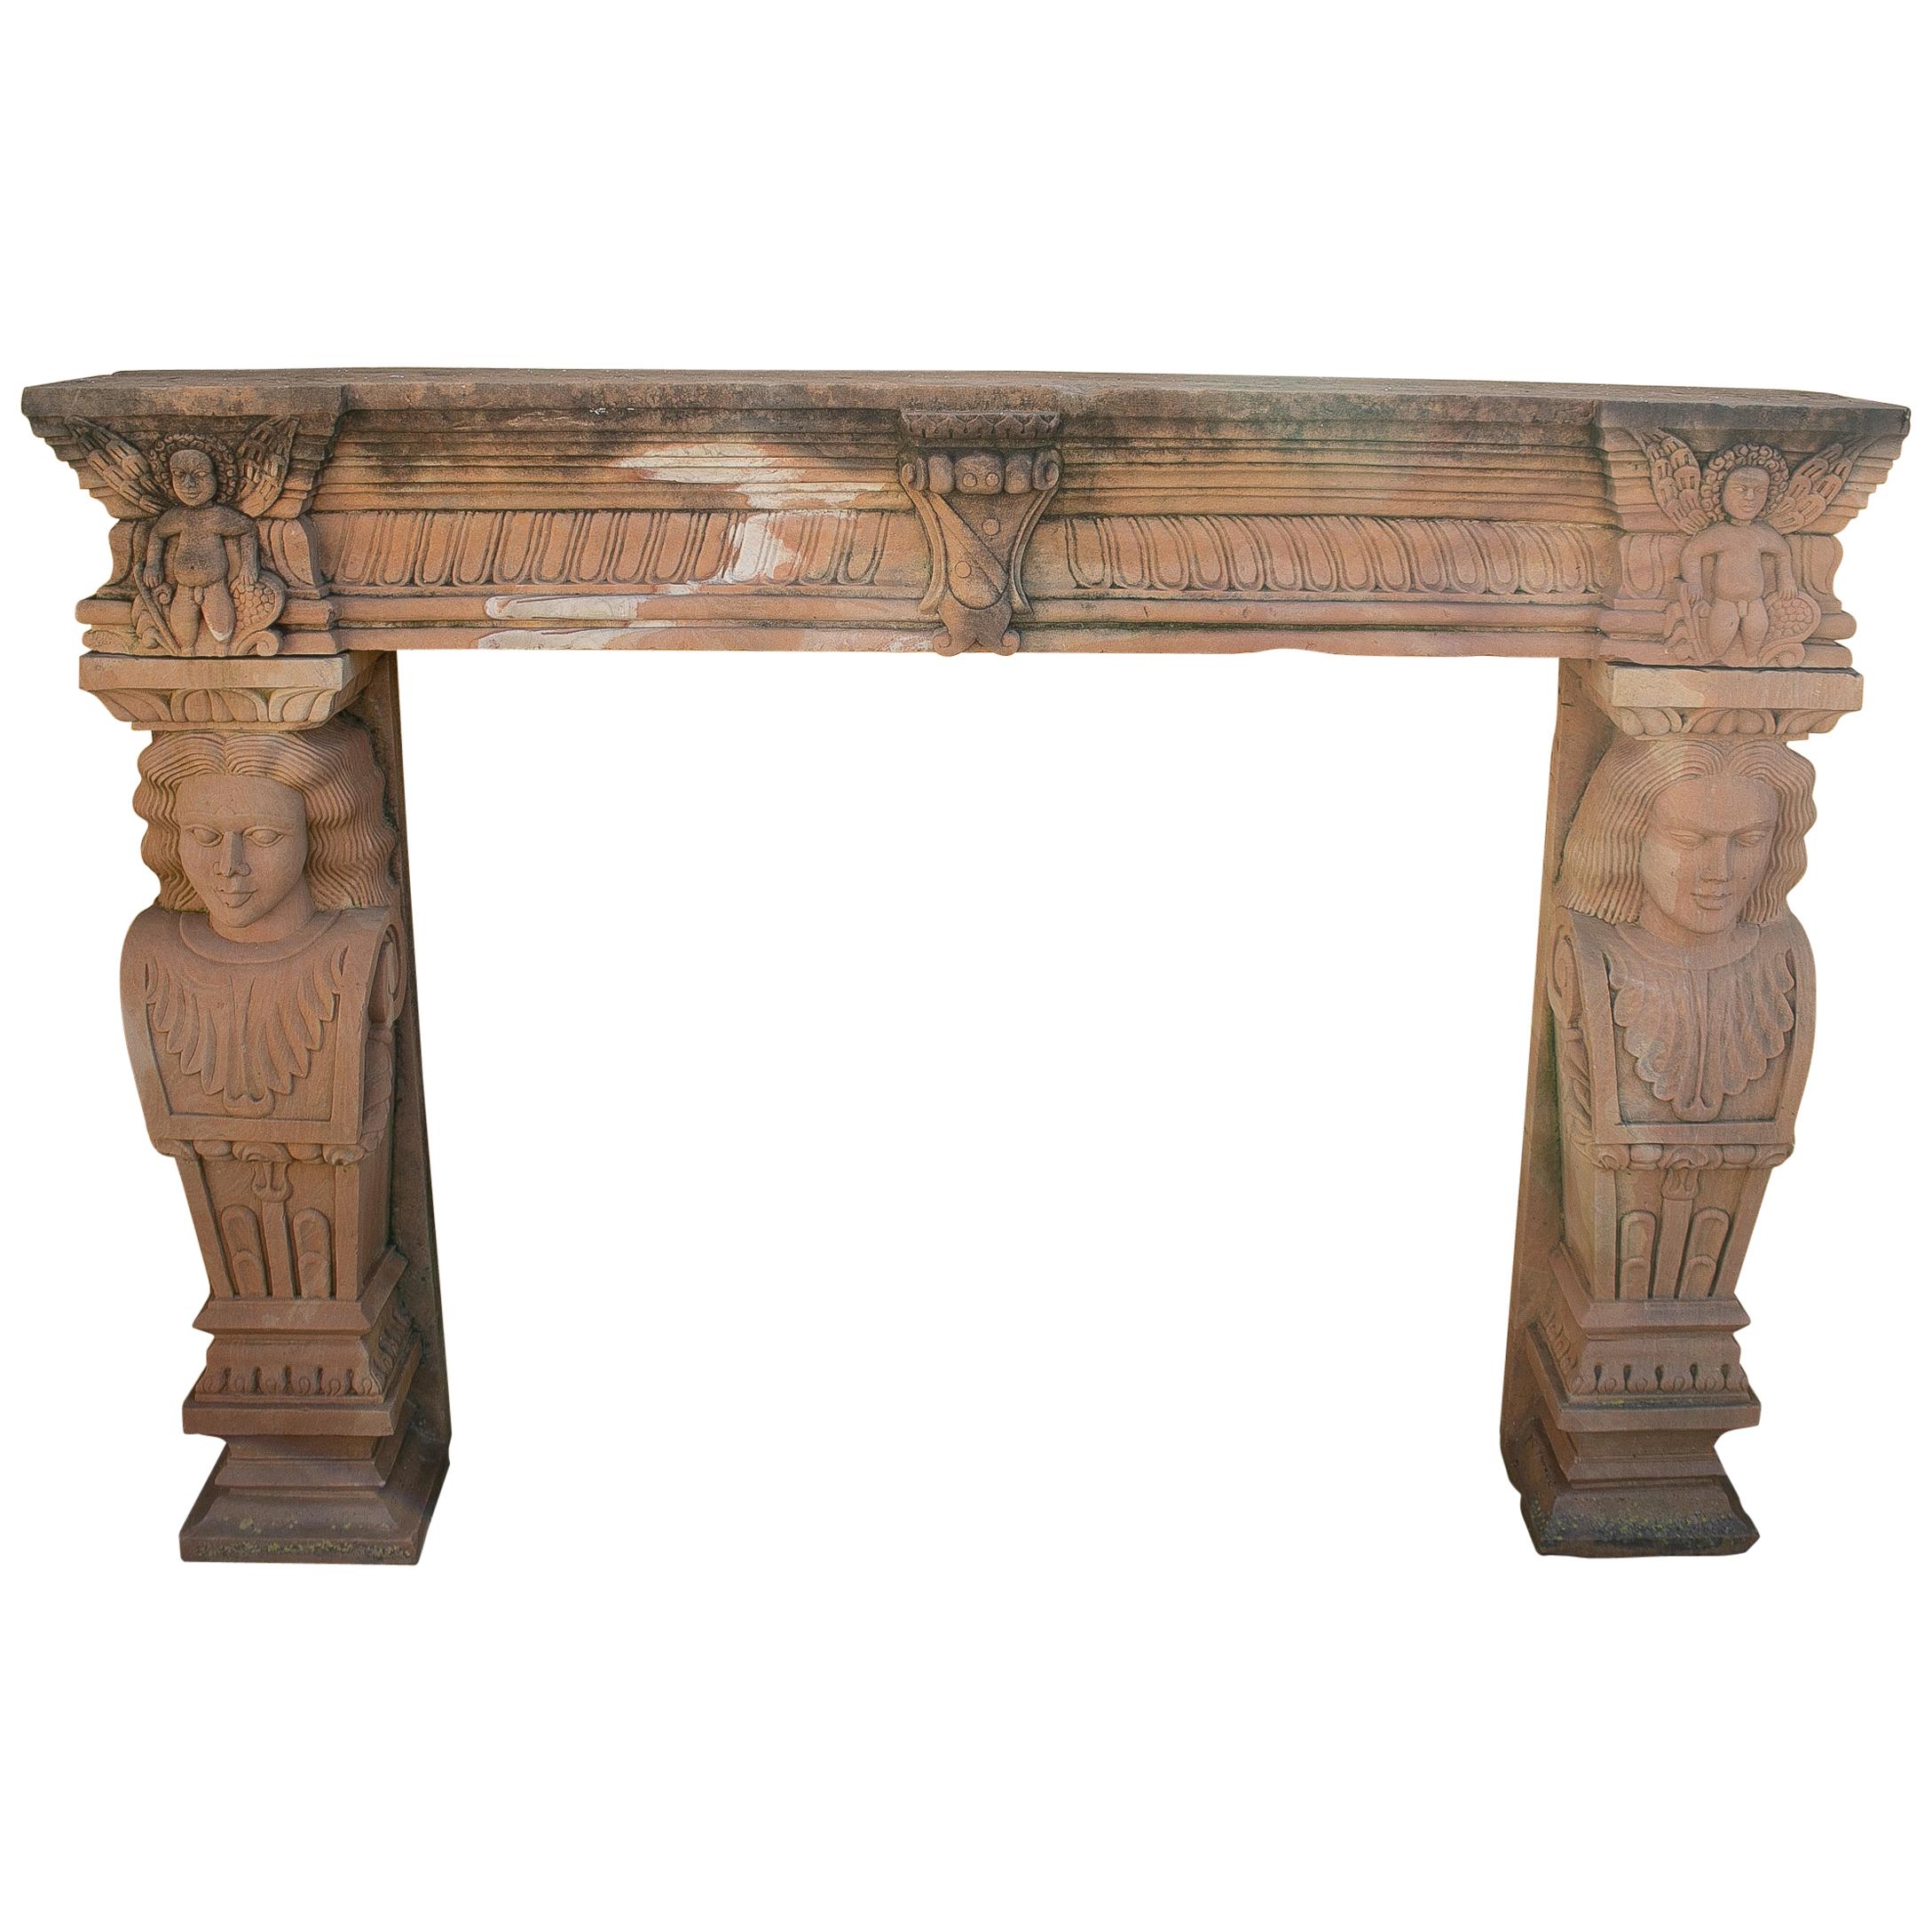 1990s Indian Hand Carved Sandstone Fireplace Mantle with Caryatid Pilasters